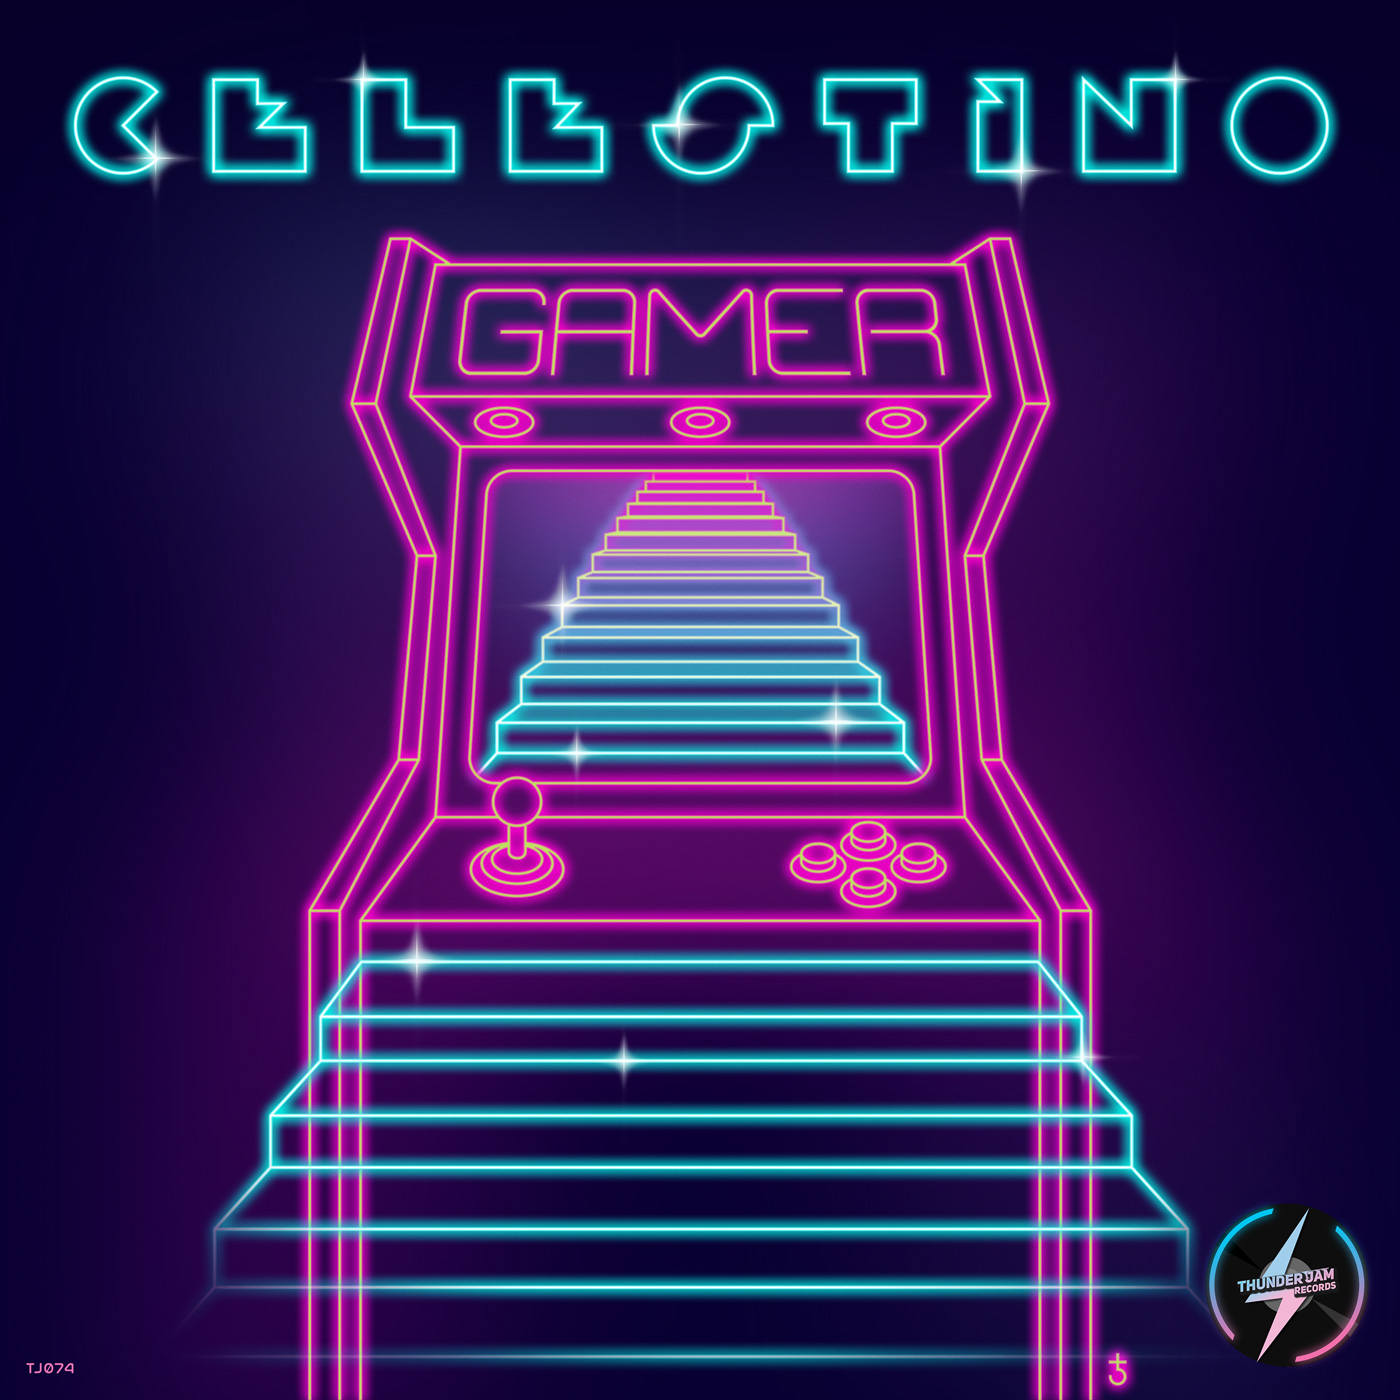 illustration_andre_levy_zhion_vector_pop_music_cover_celestino_ep_gamer_arcade_stairs_neon_retro_80s_nudisco.jpg